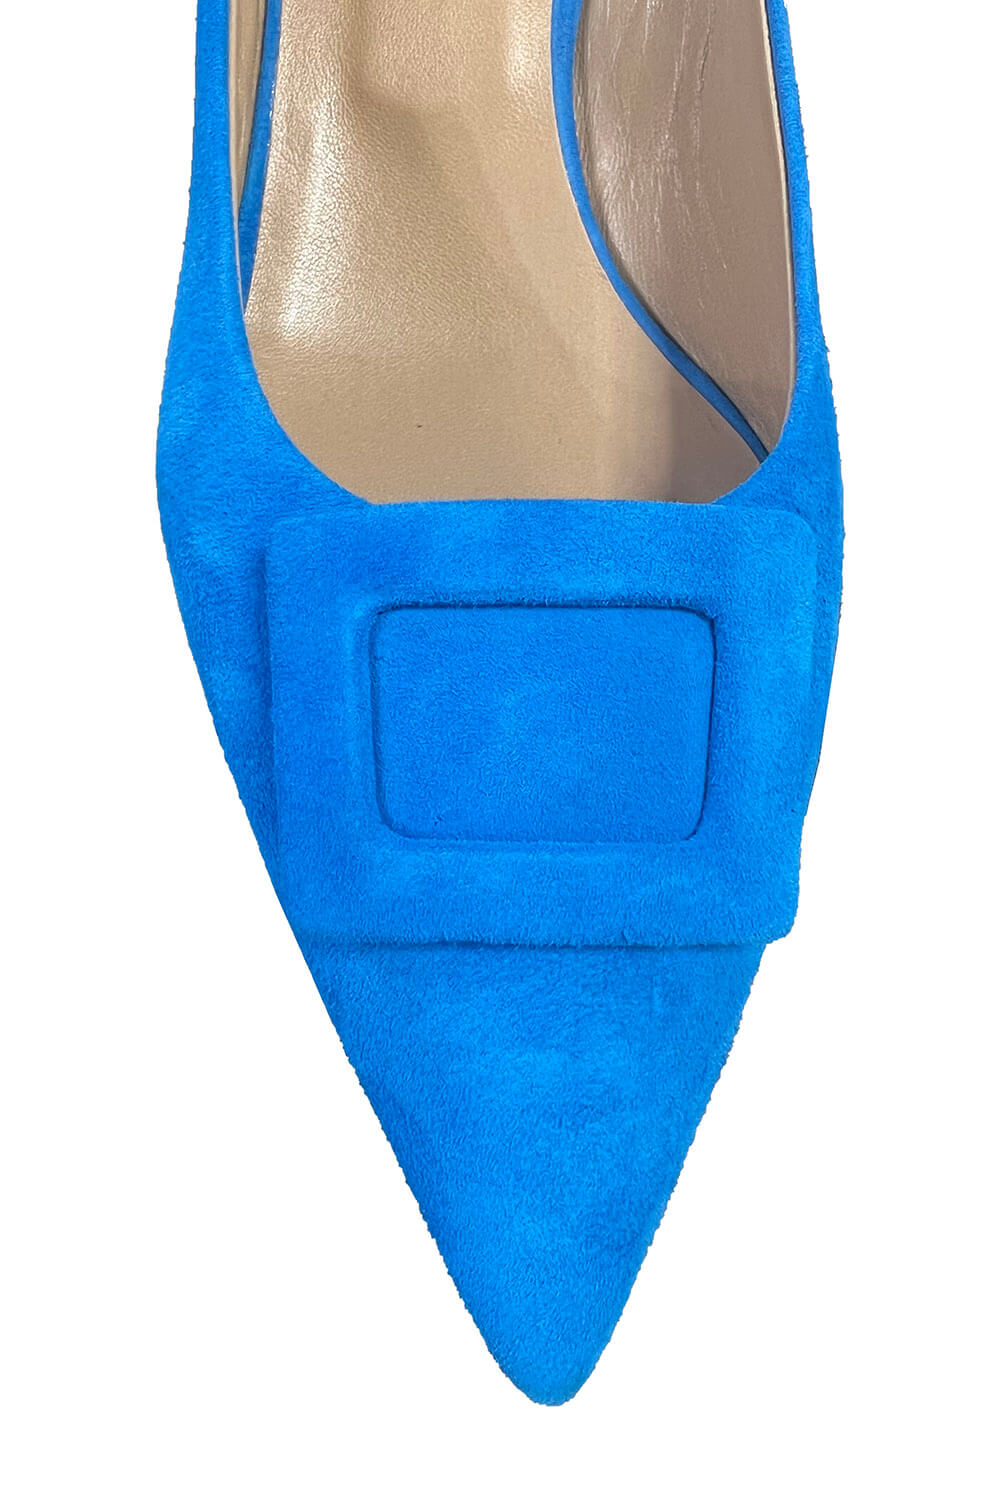 GIOVANNA GRAZZINI Azur blue suede leather pumps with buckle CICLADI